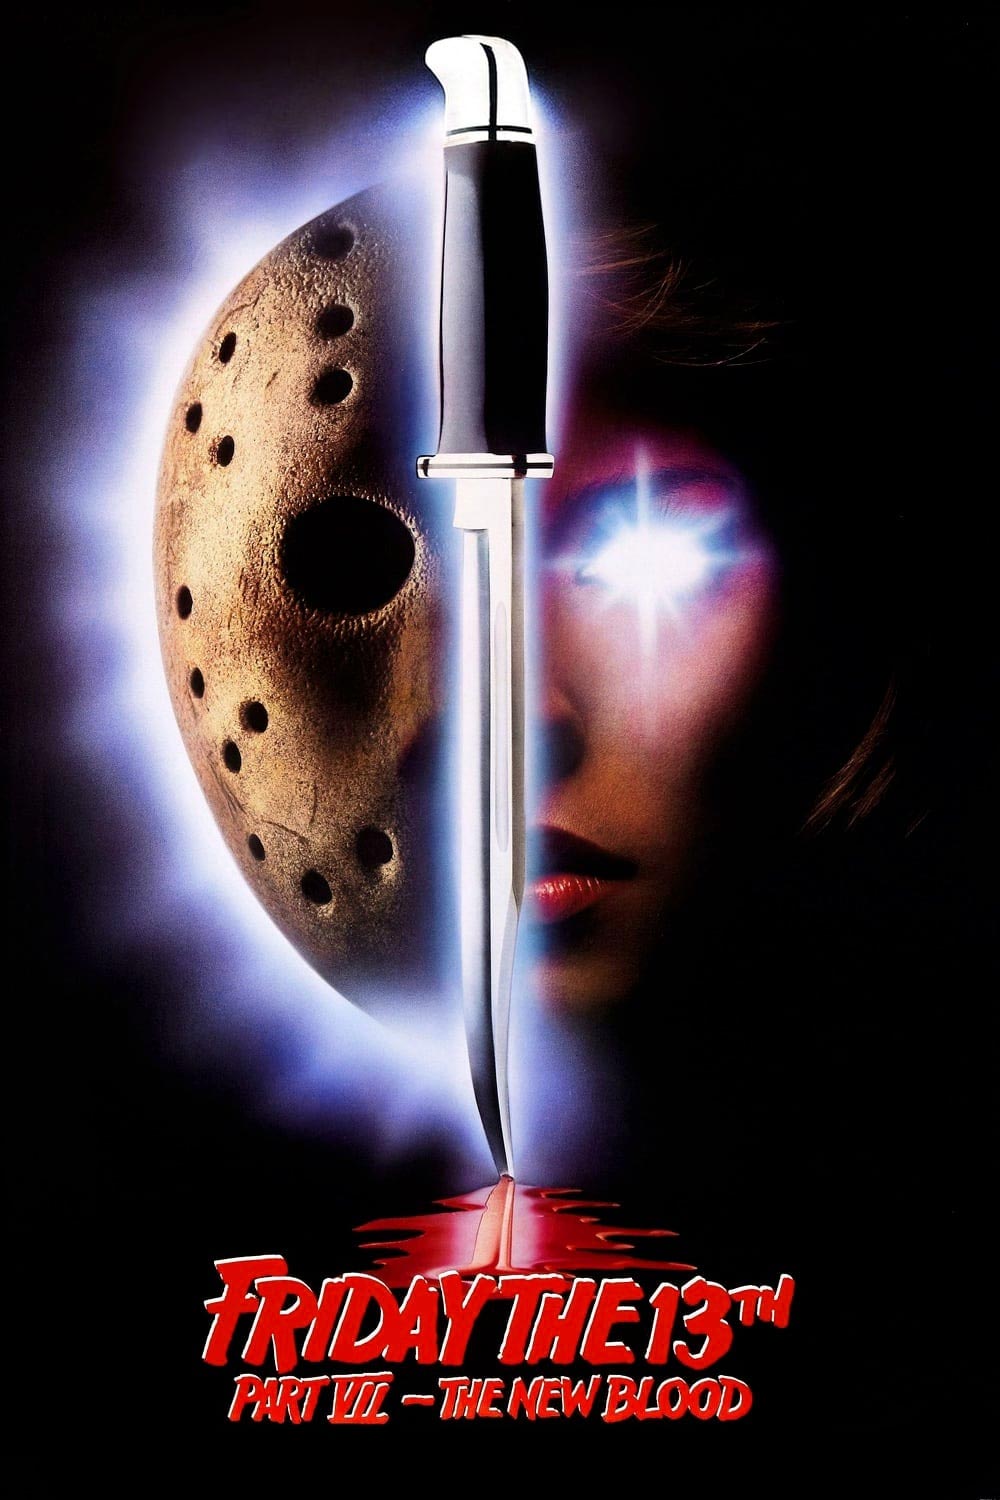 Friday the 13th part VII: The New Blood Poster